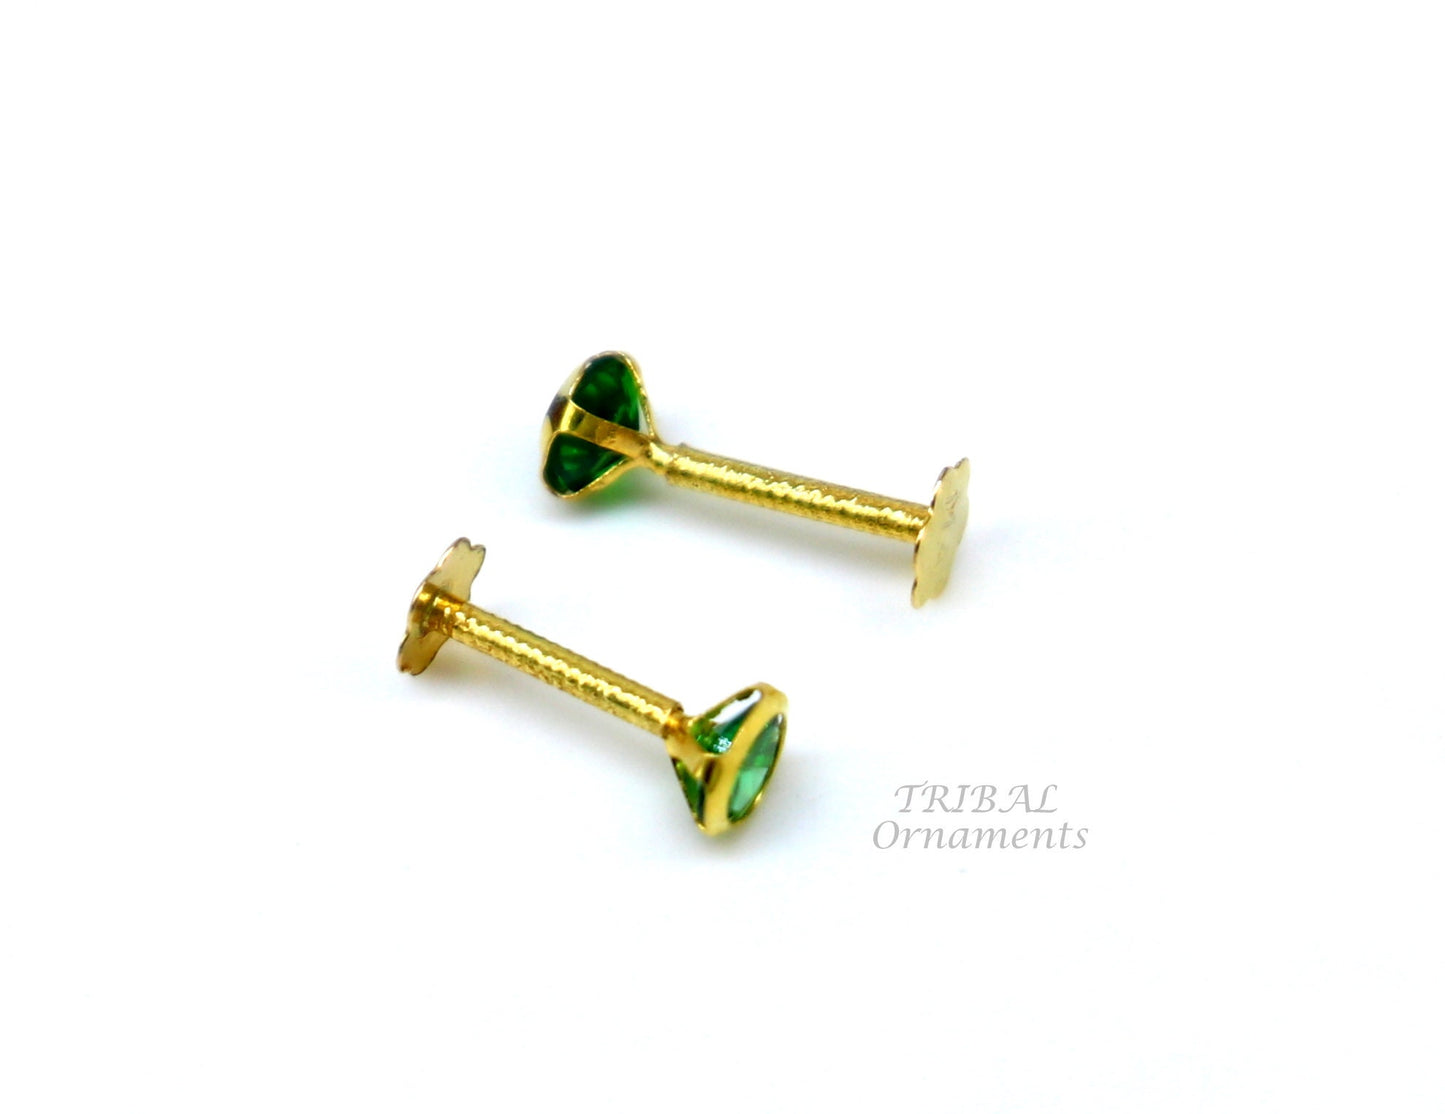 3mm 18k yellow gold handmade fabulous green cubic zircon stone excellent antique vintage design stud earrings pair unisex jewelry er156 - TRIBAL ORNAMENTS